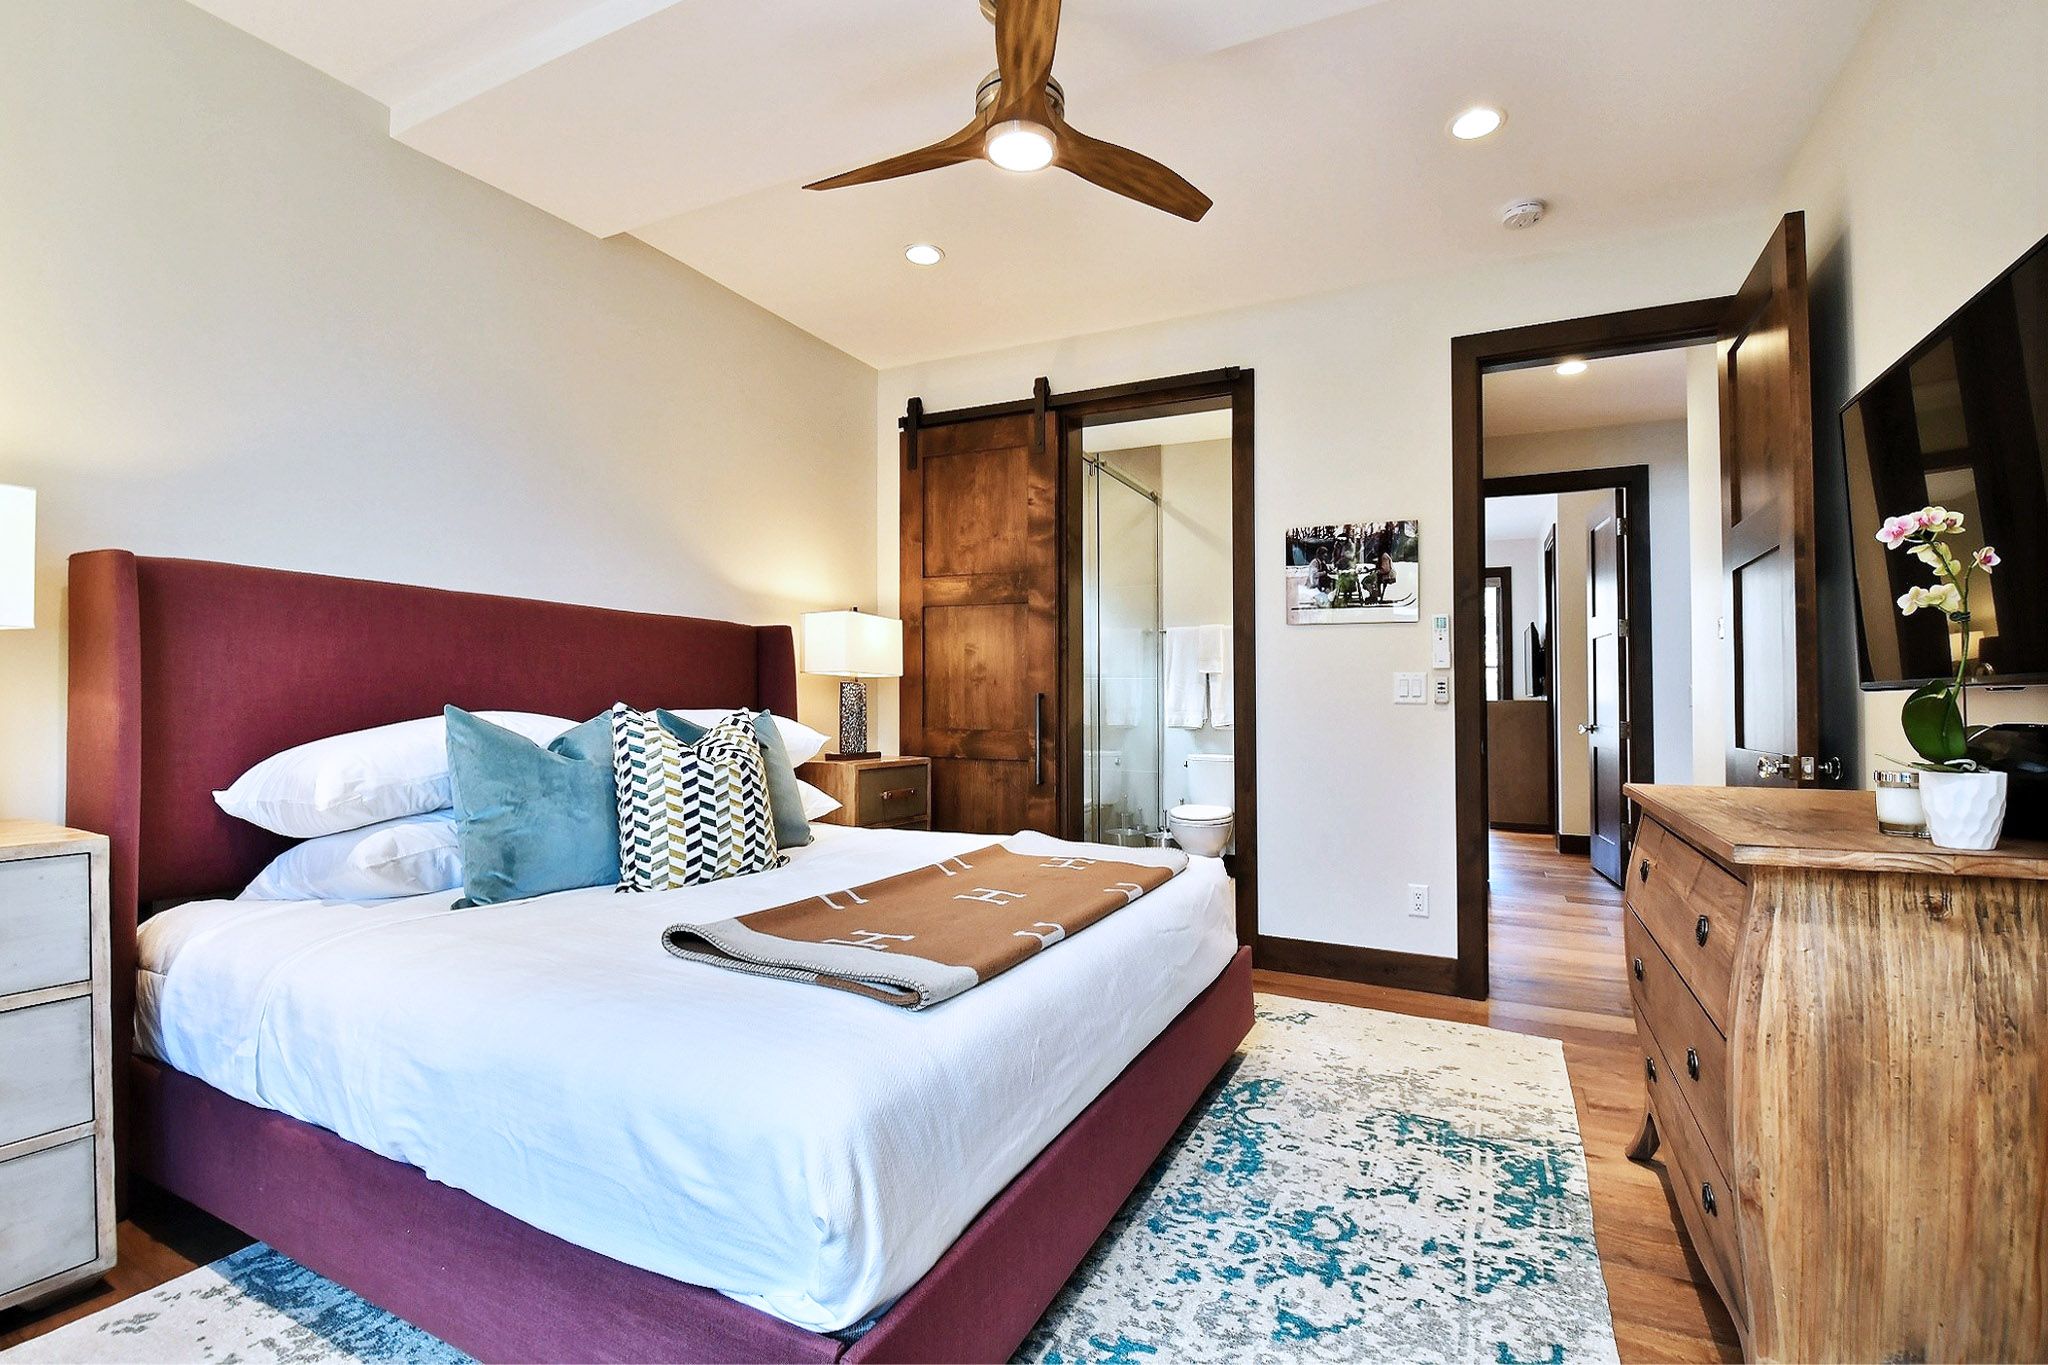 King master suite bedroom with personal ceiling fan, HDTV and attached bathroom.